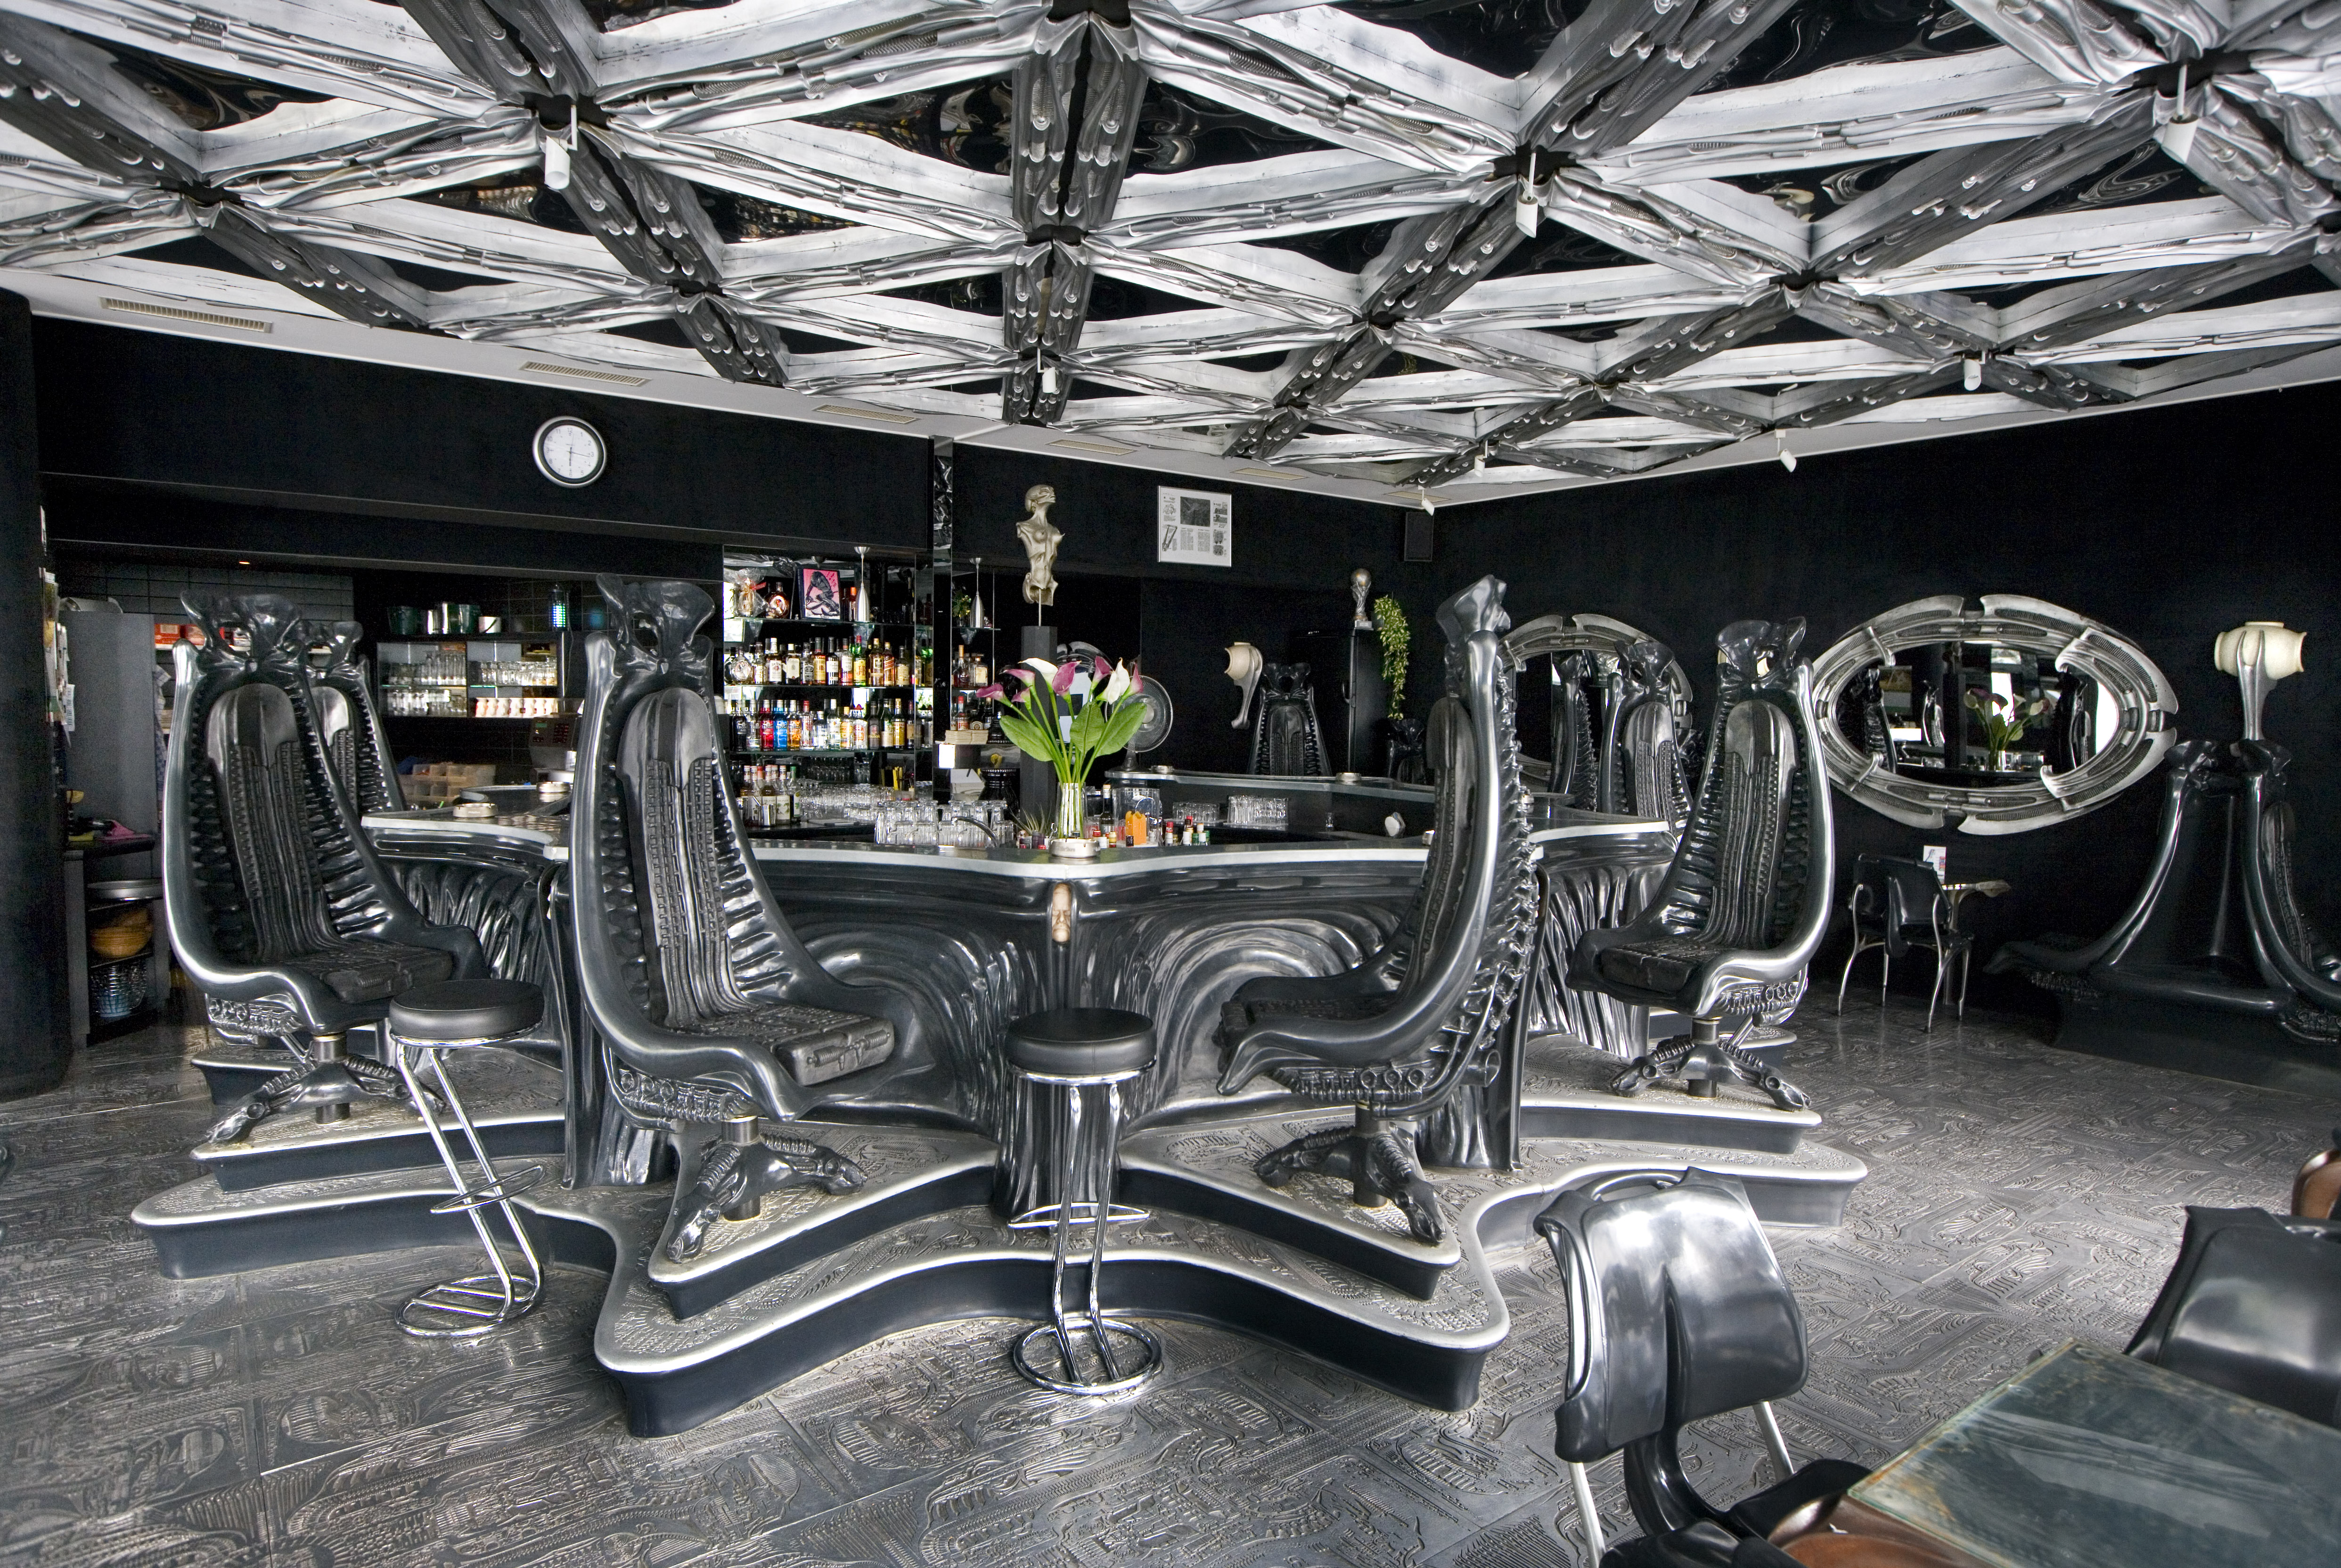 A view of the  The Giger Bar  in the canton of Grisons. The bar was designed and is owned by H.R. Giger.